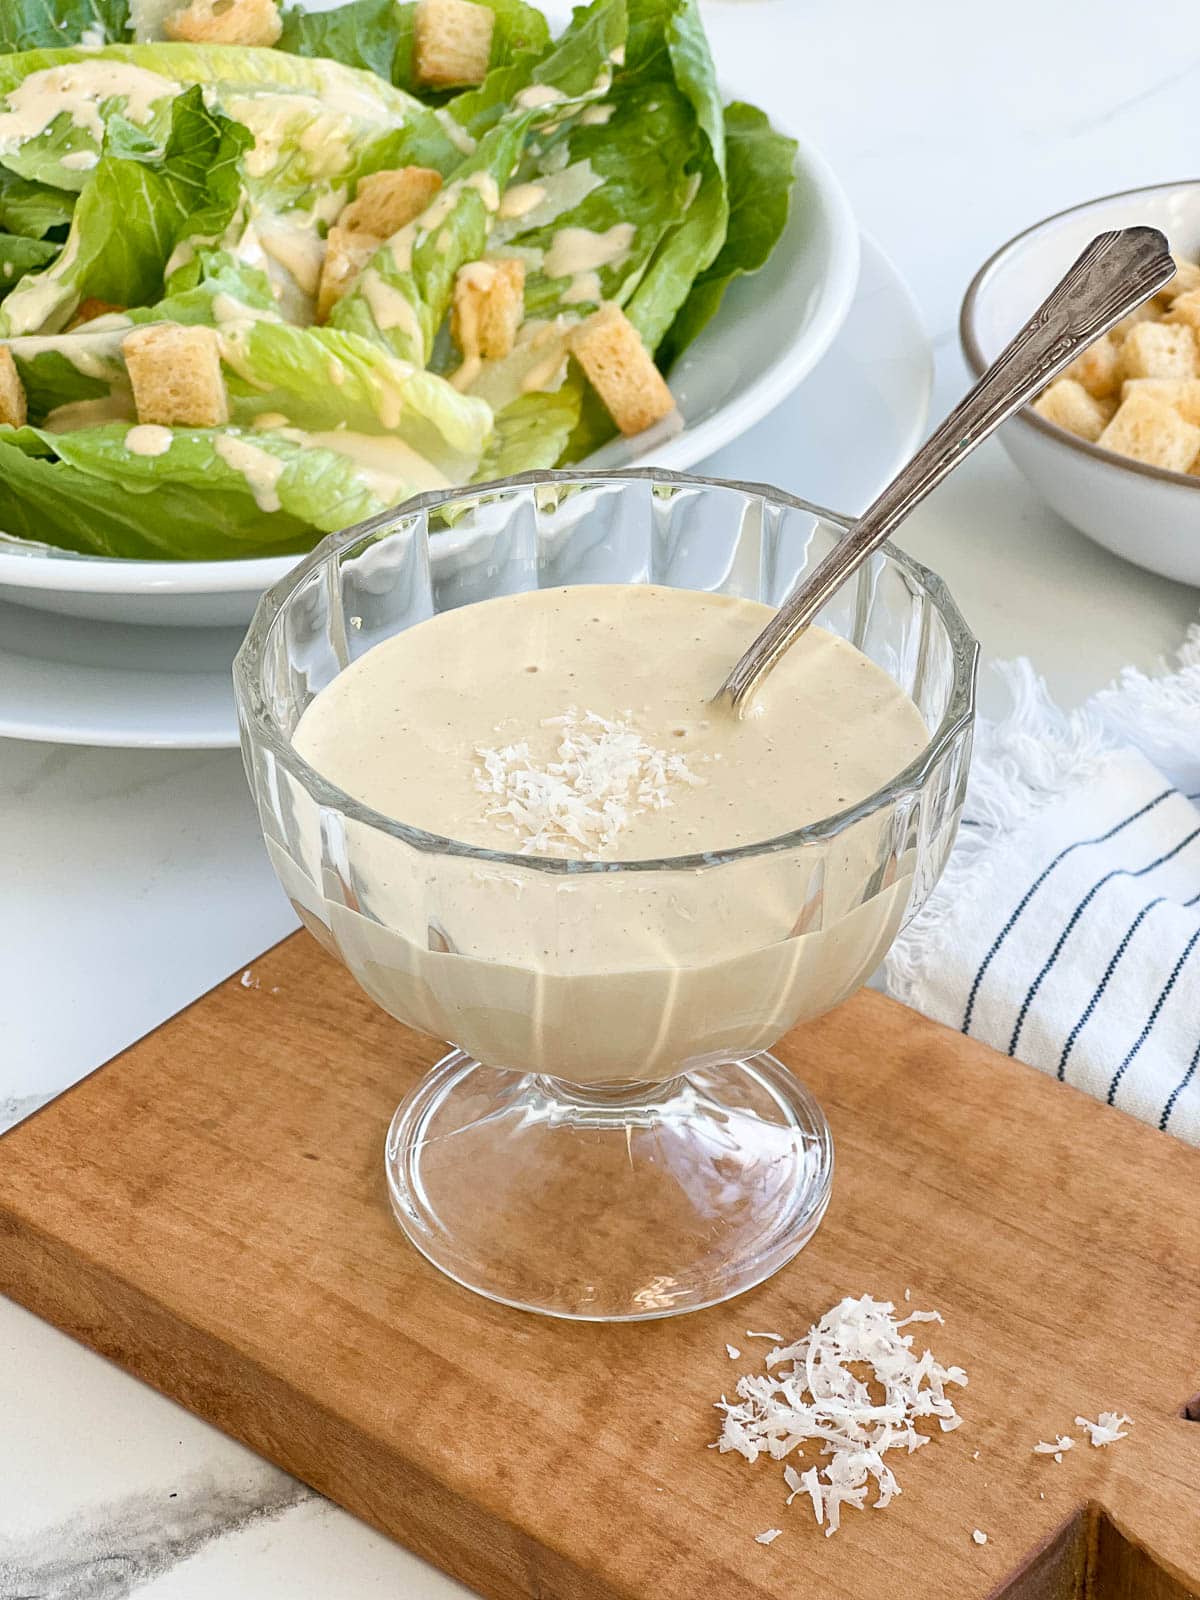 Caesar dressing in a glass bowl with spoon.